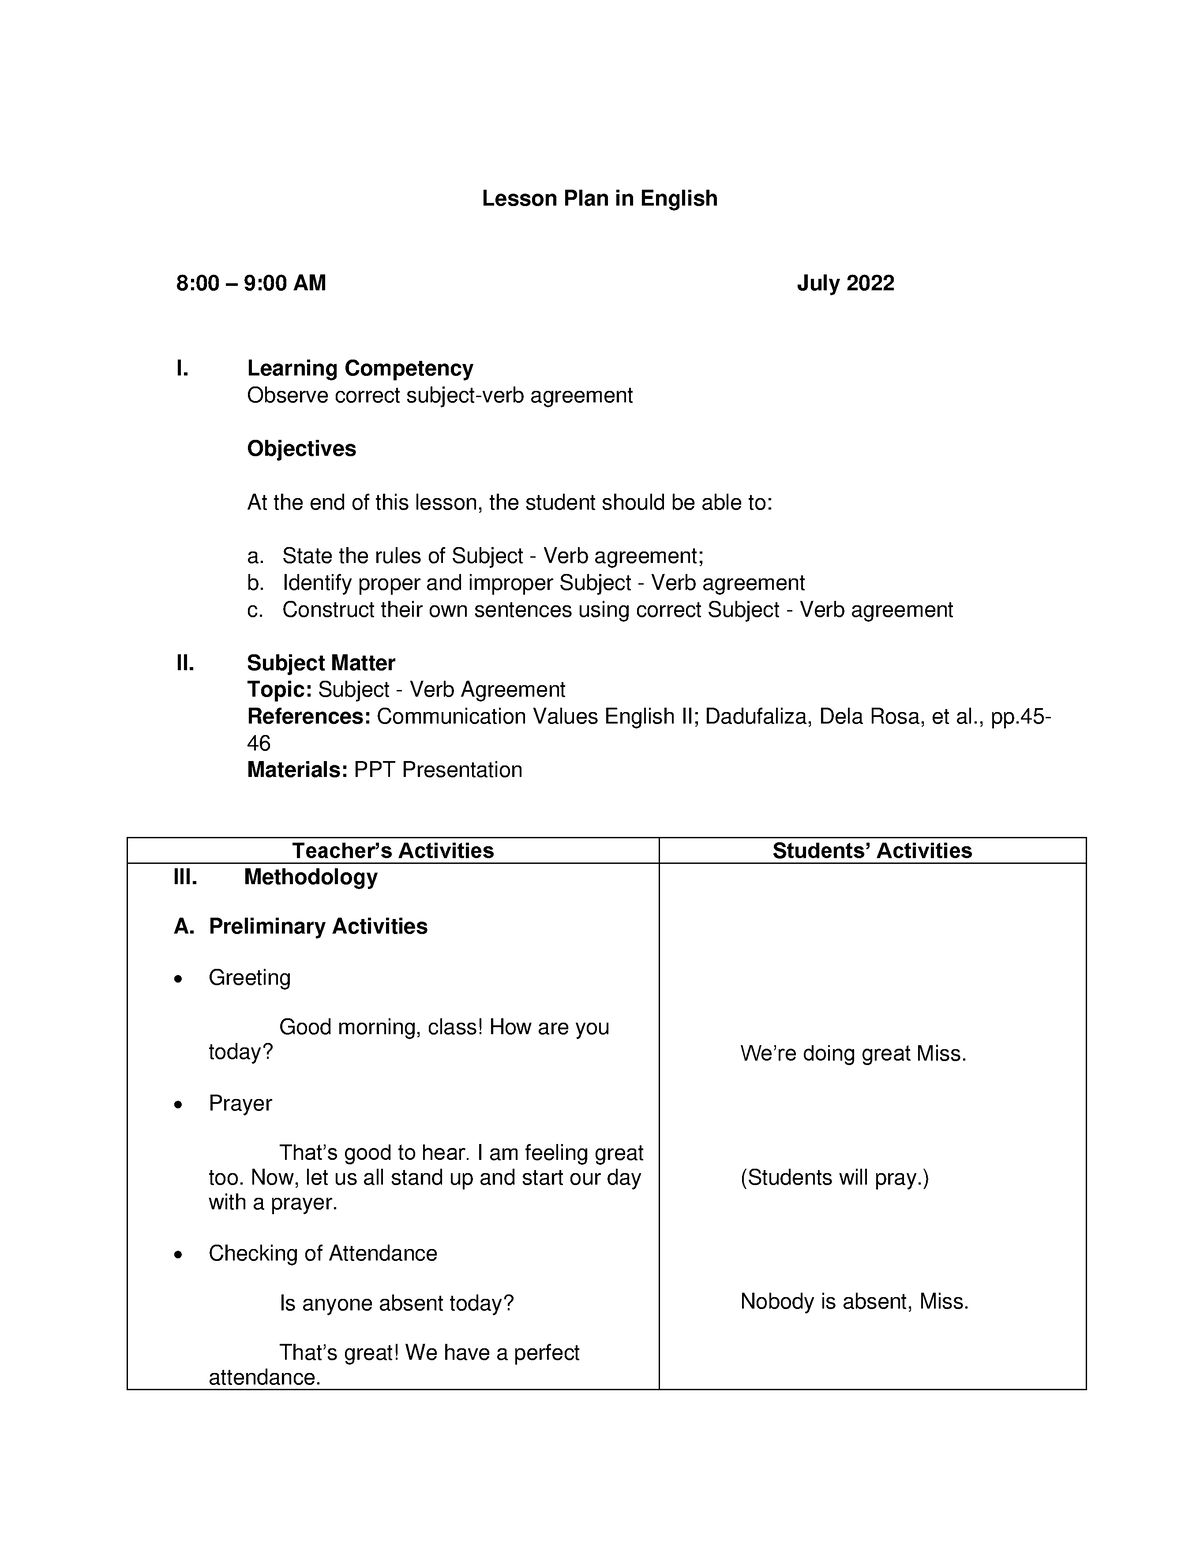 Lesson Plan in English Subject-Verb Agreement - Lesson Plan in English ...